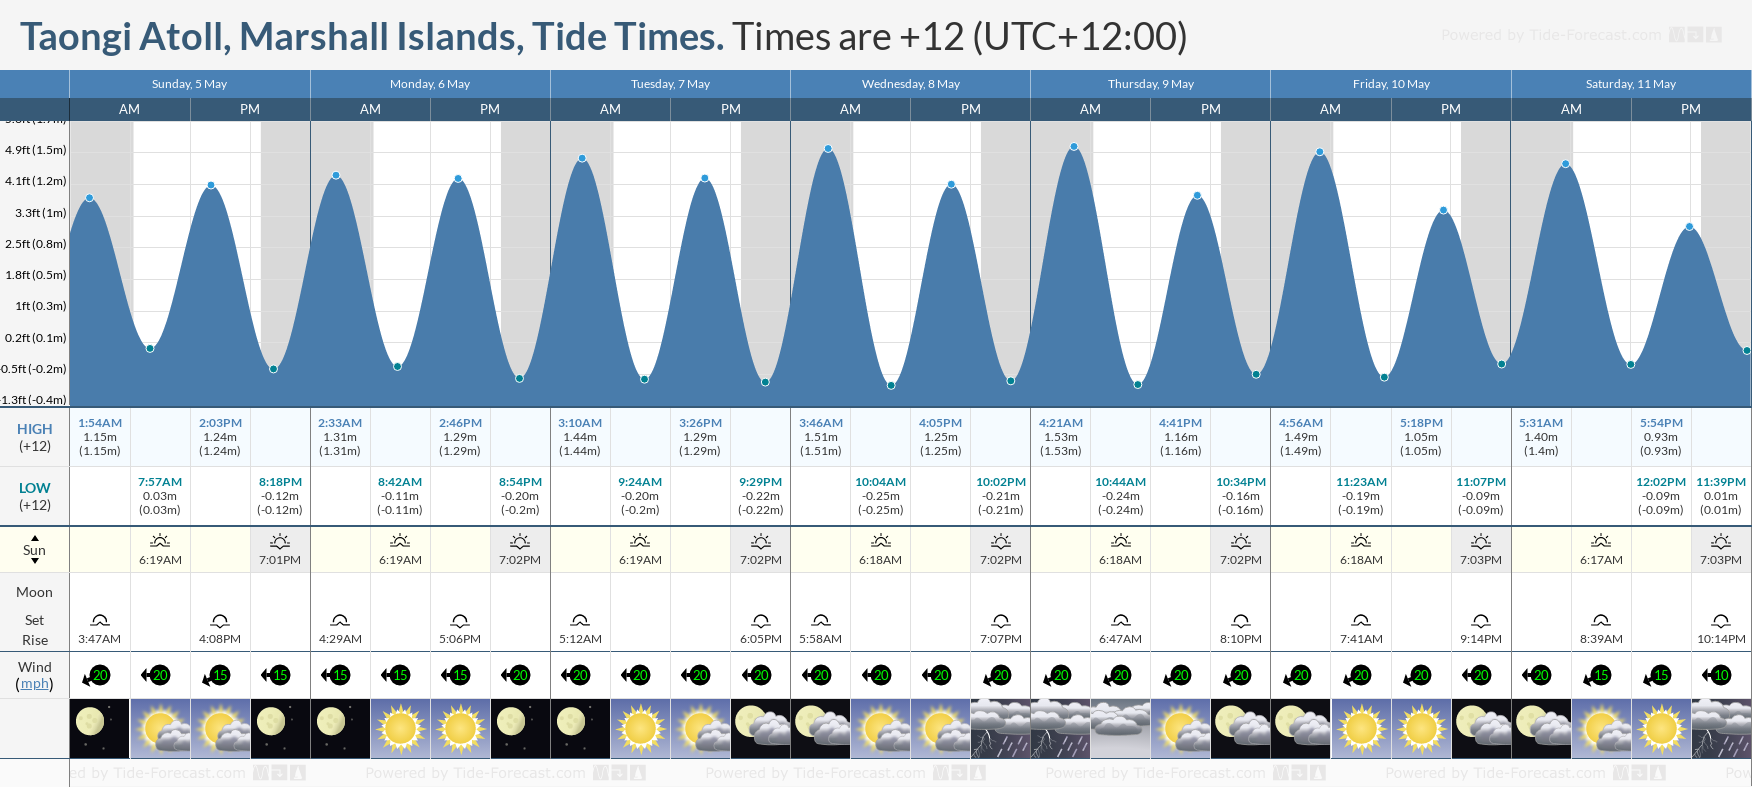 Taongi Atoll, Marshall Islands Tide Chart including high and low tide tide times for the next 7 days